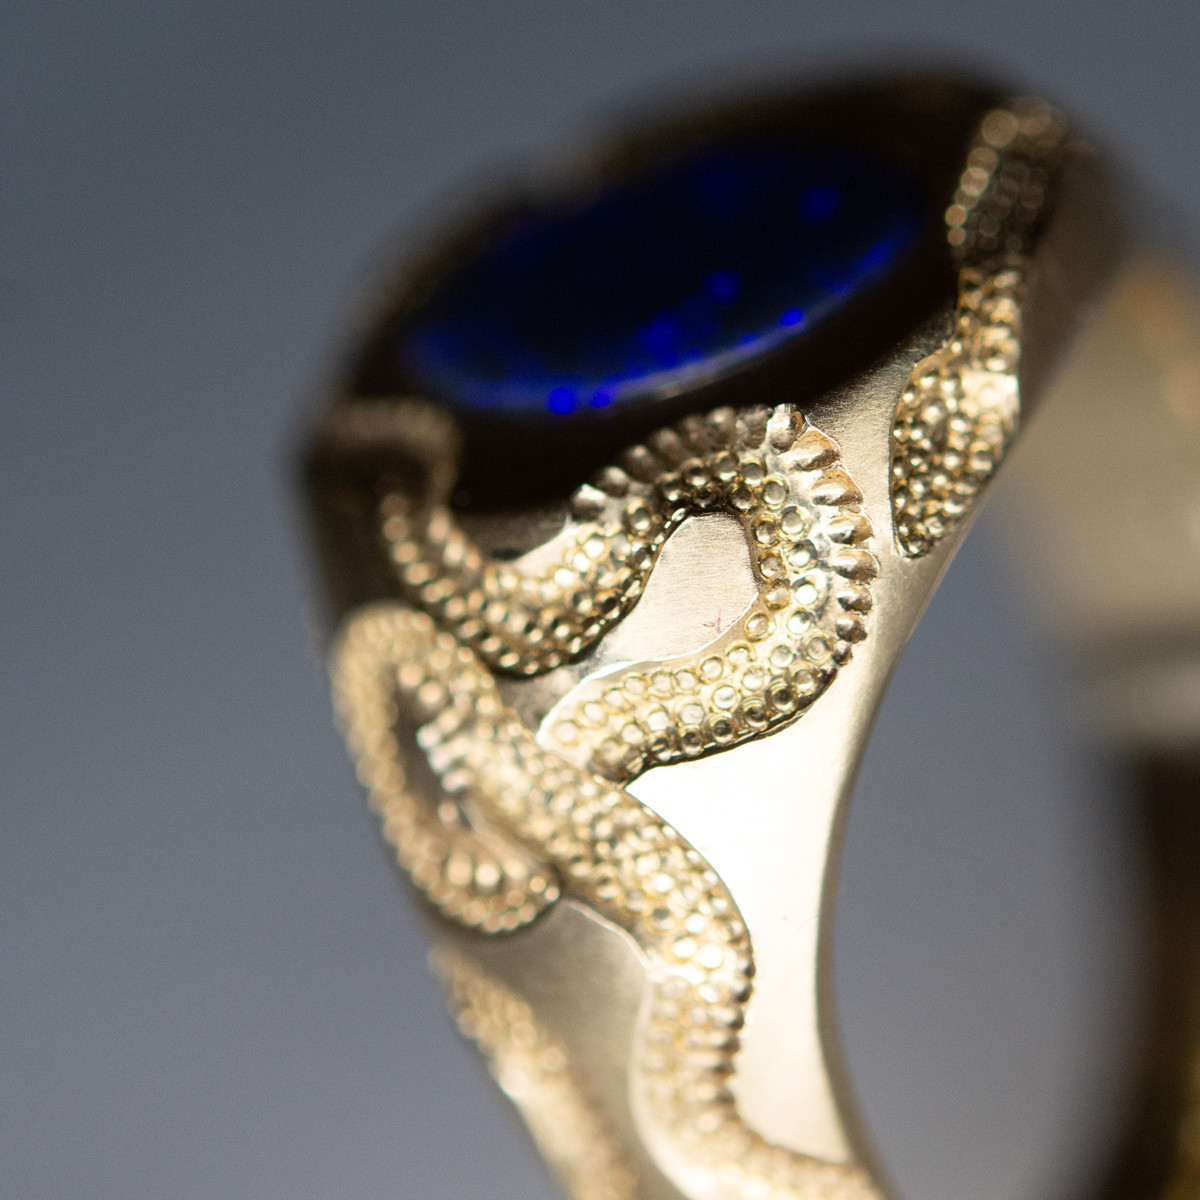 Creation Art Ring by Maiden Voyage available at tomfoolery London as a part of Art Ring 2021 exhibition.